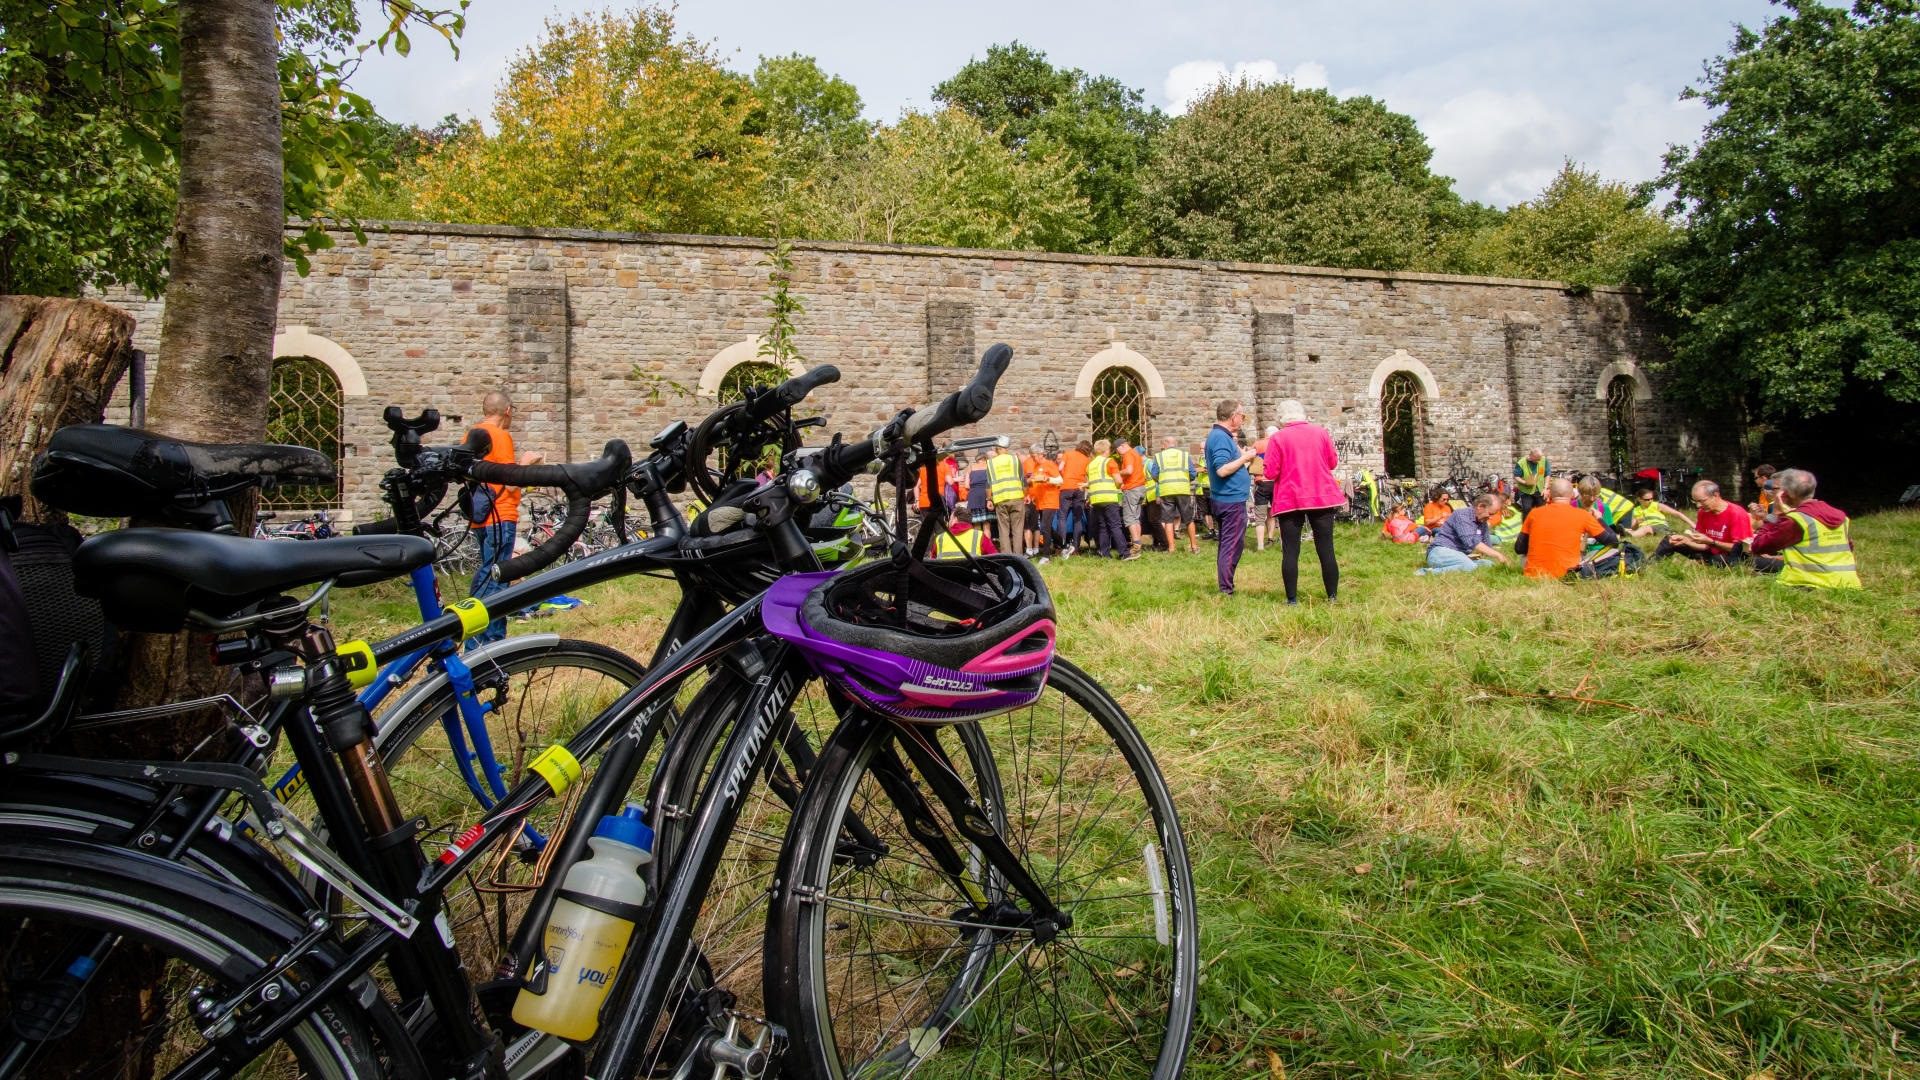 People in high vis jackets sitting in a grassy field in front of an old railway wall with bikes leaning against trees.